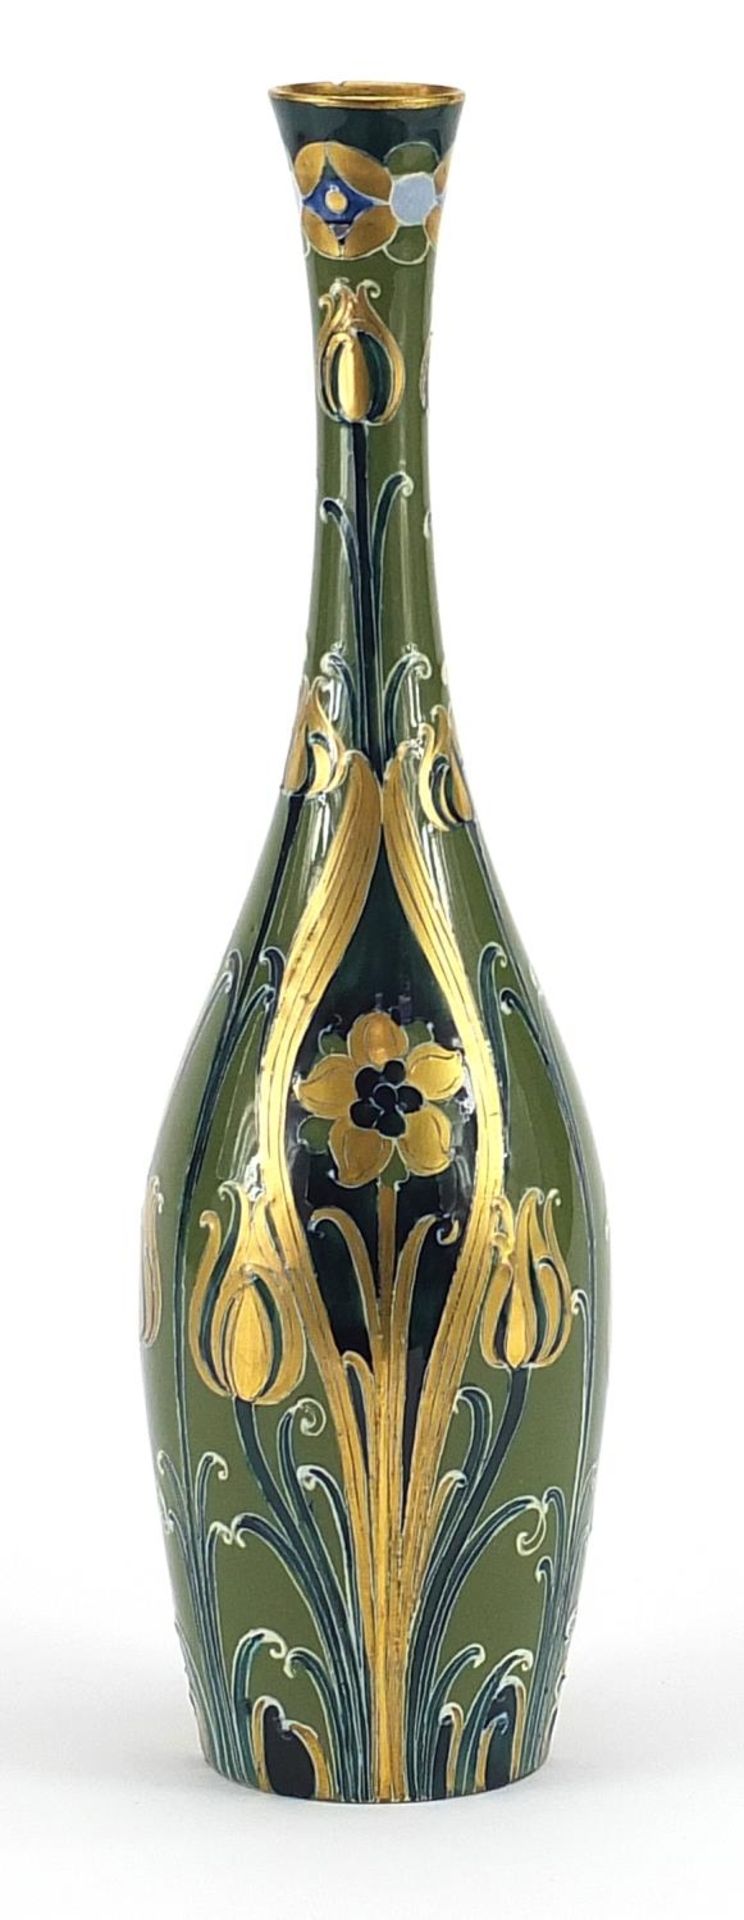 Macintyre Moorcroft vase hand painted and gilded with stylised flowers, 30.5cm high - Image 2 of 4